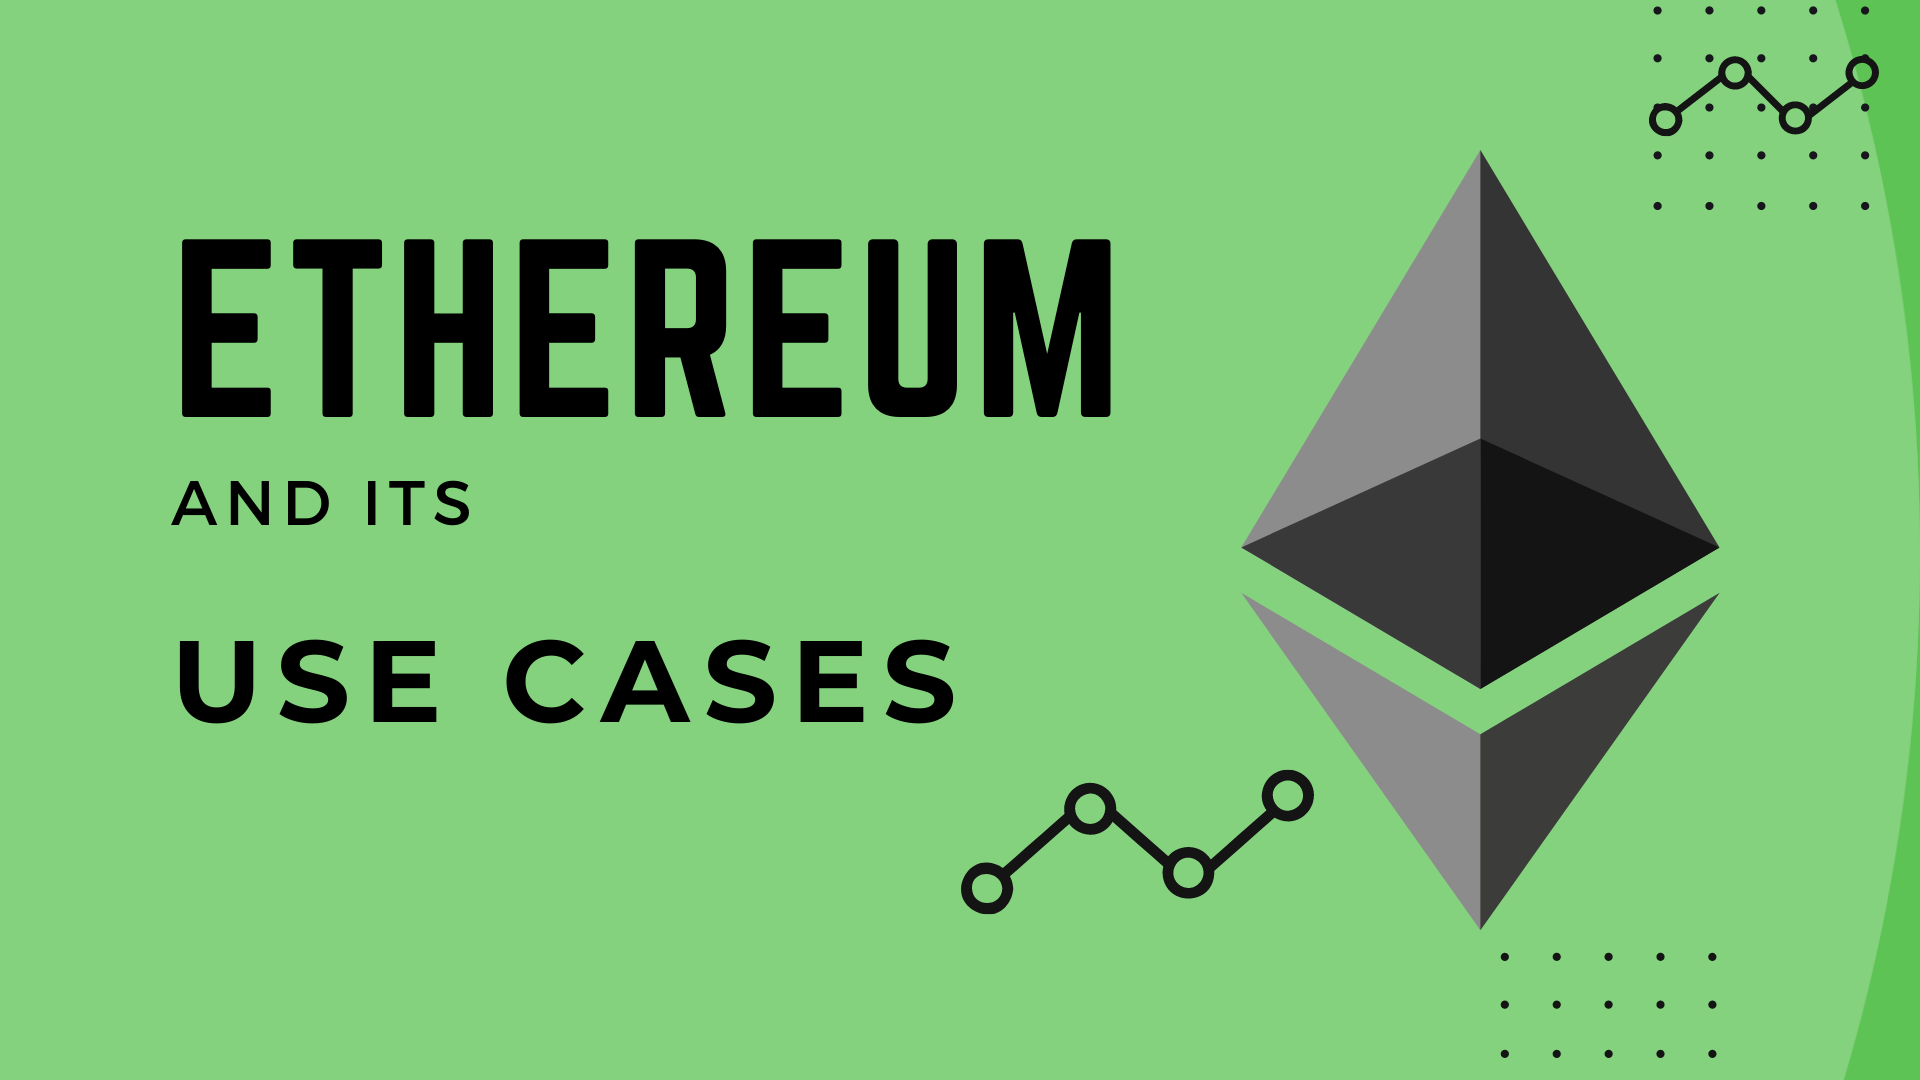 What is Ethereum? (Full details about ethereum)